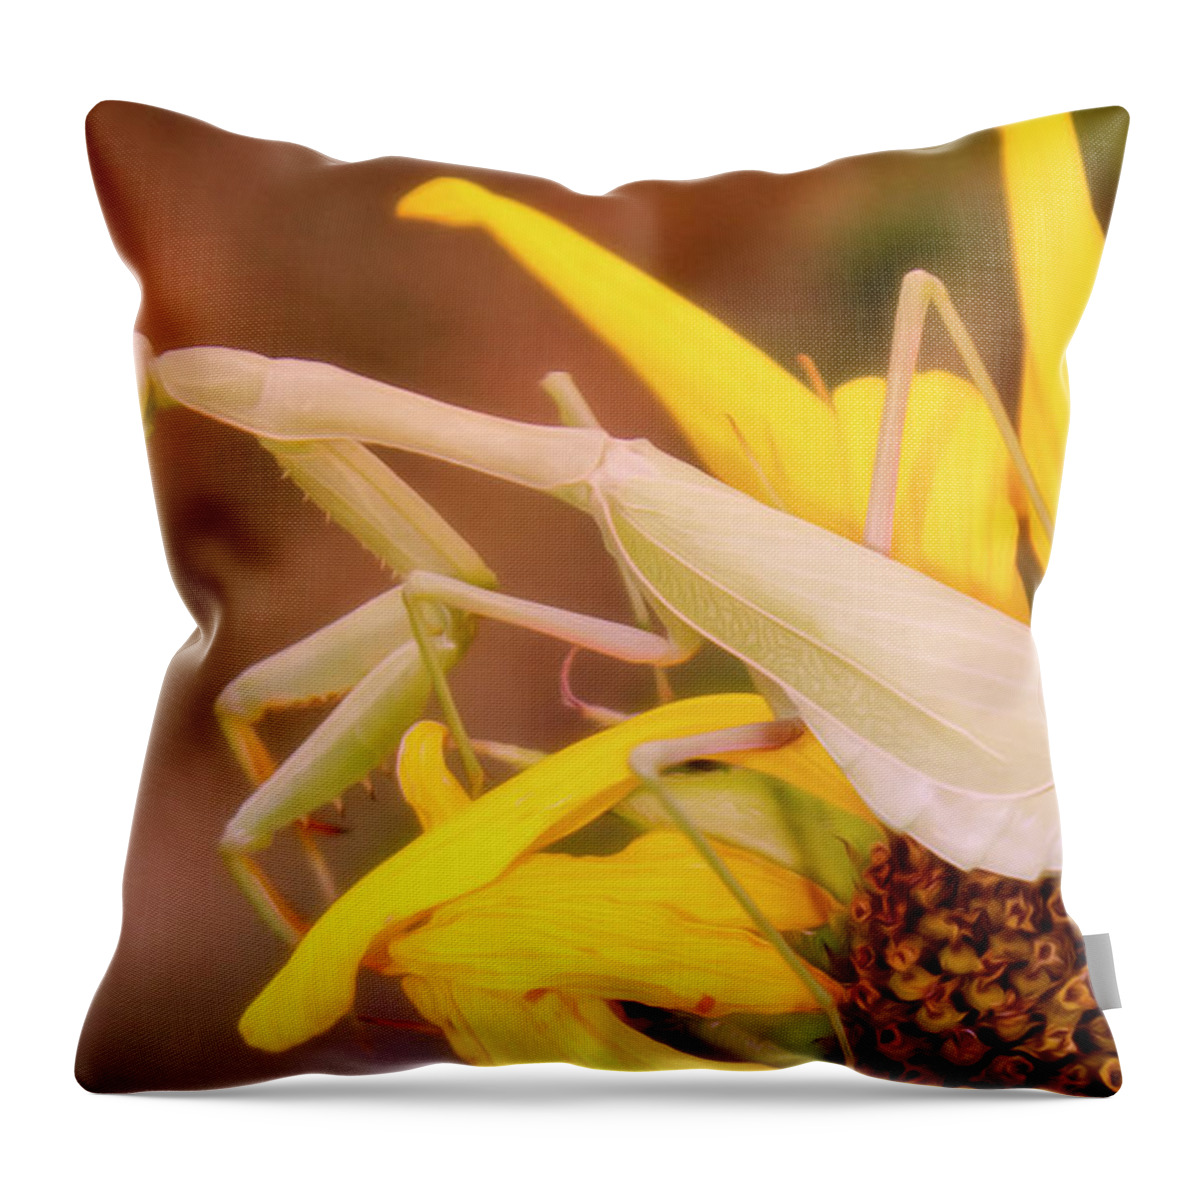 Enlightened Animals Throw Pillow featuring the digital art Waiting For A Beau by Becky Titus